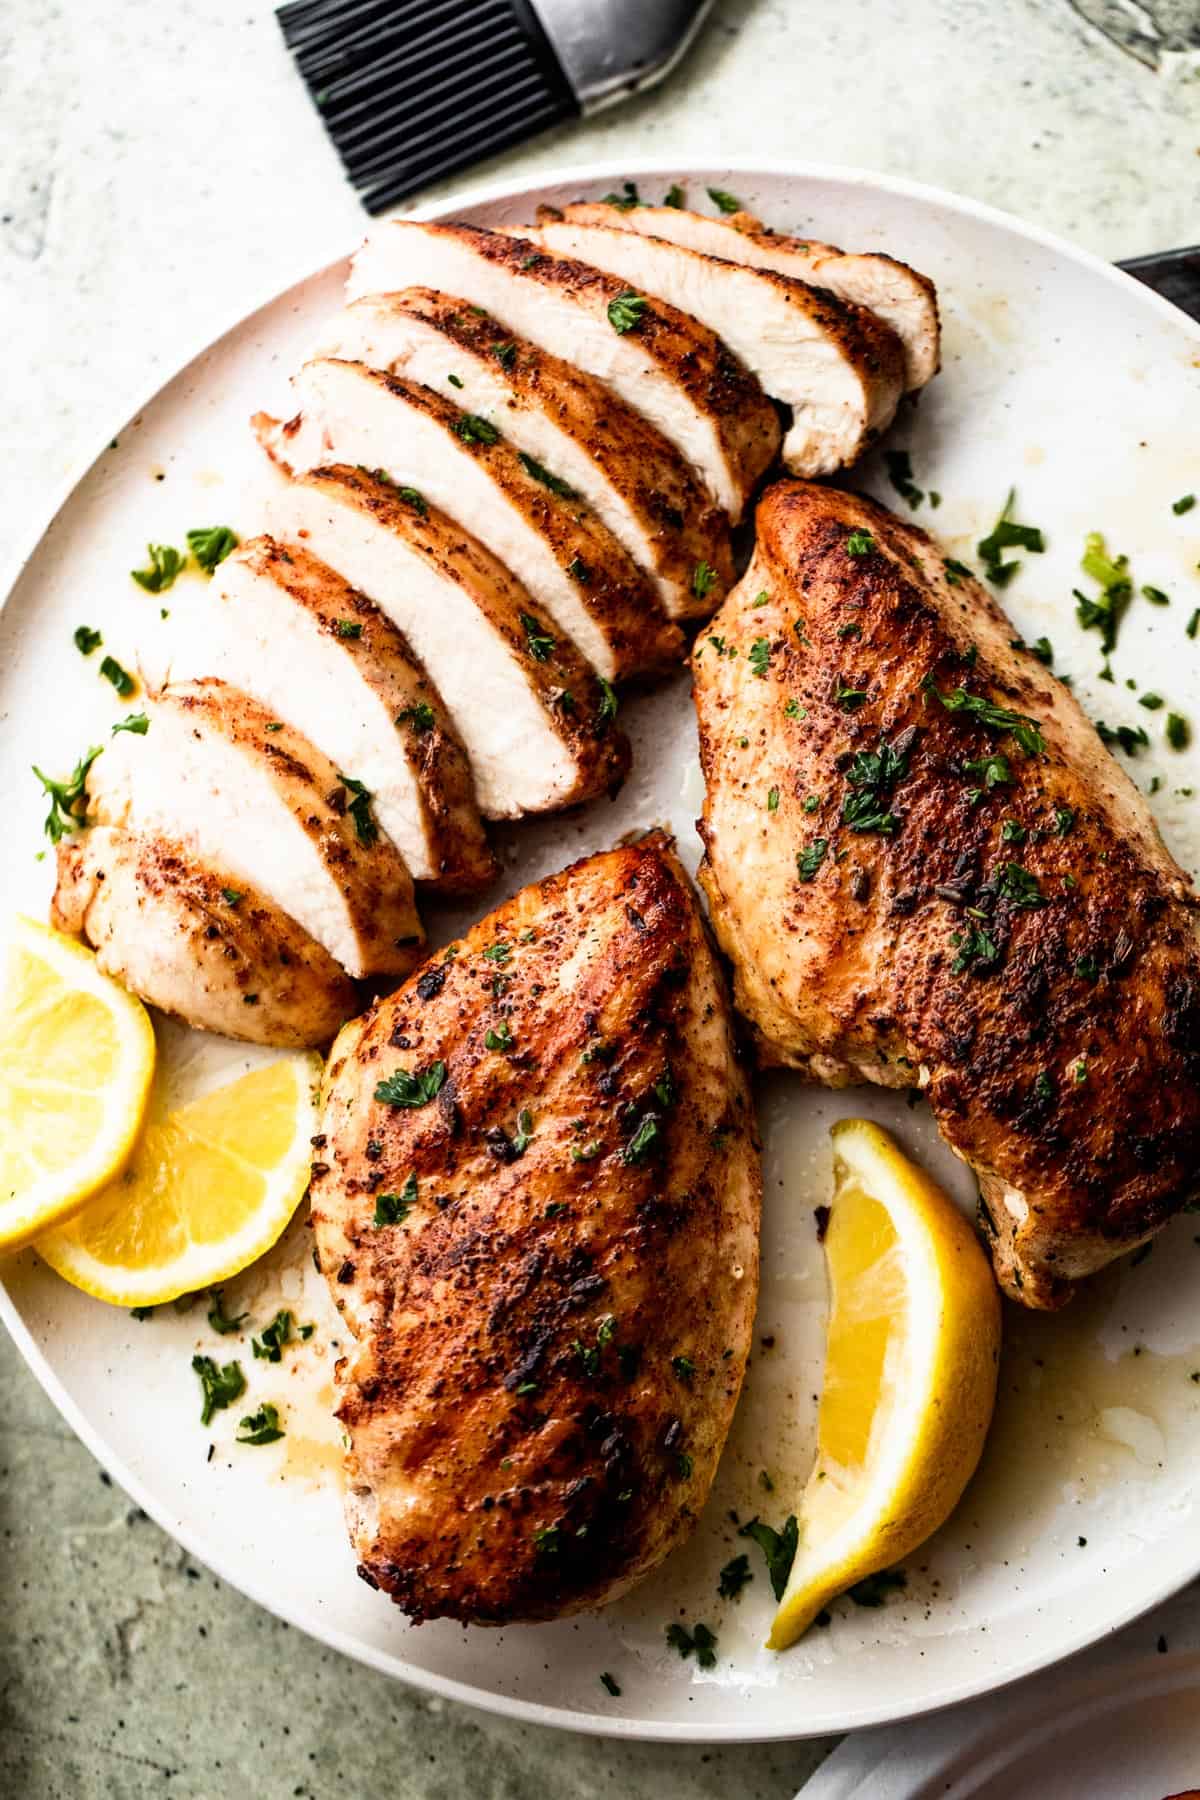 two whole grilled chicken breasts and one sliced grilled chicken breast served on a round white plate with lemon wedges.